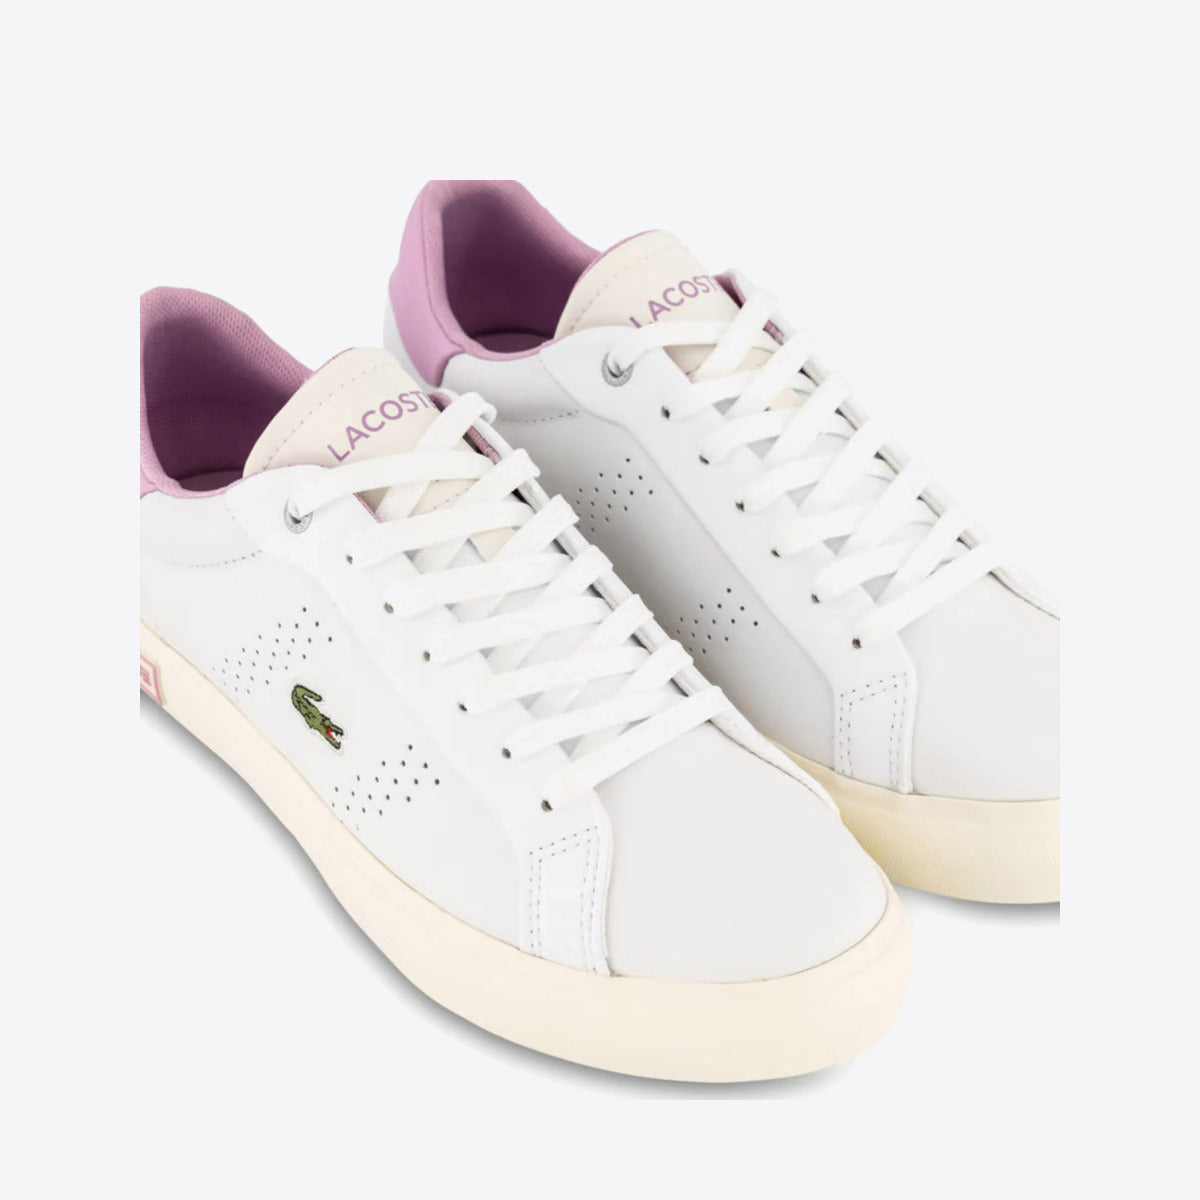 LACOSTE Powercourt 2.0 White/Pink - Image 4